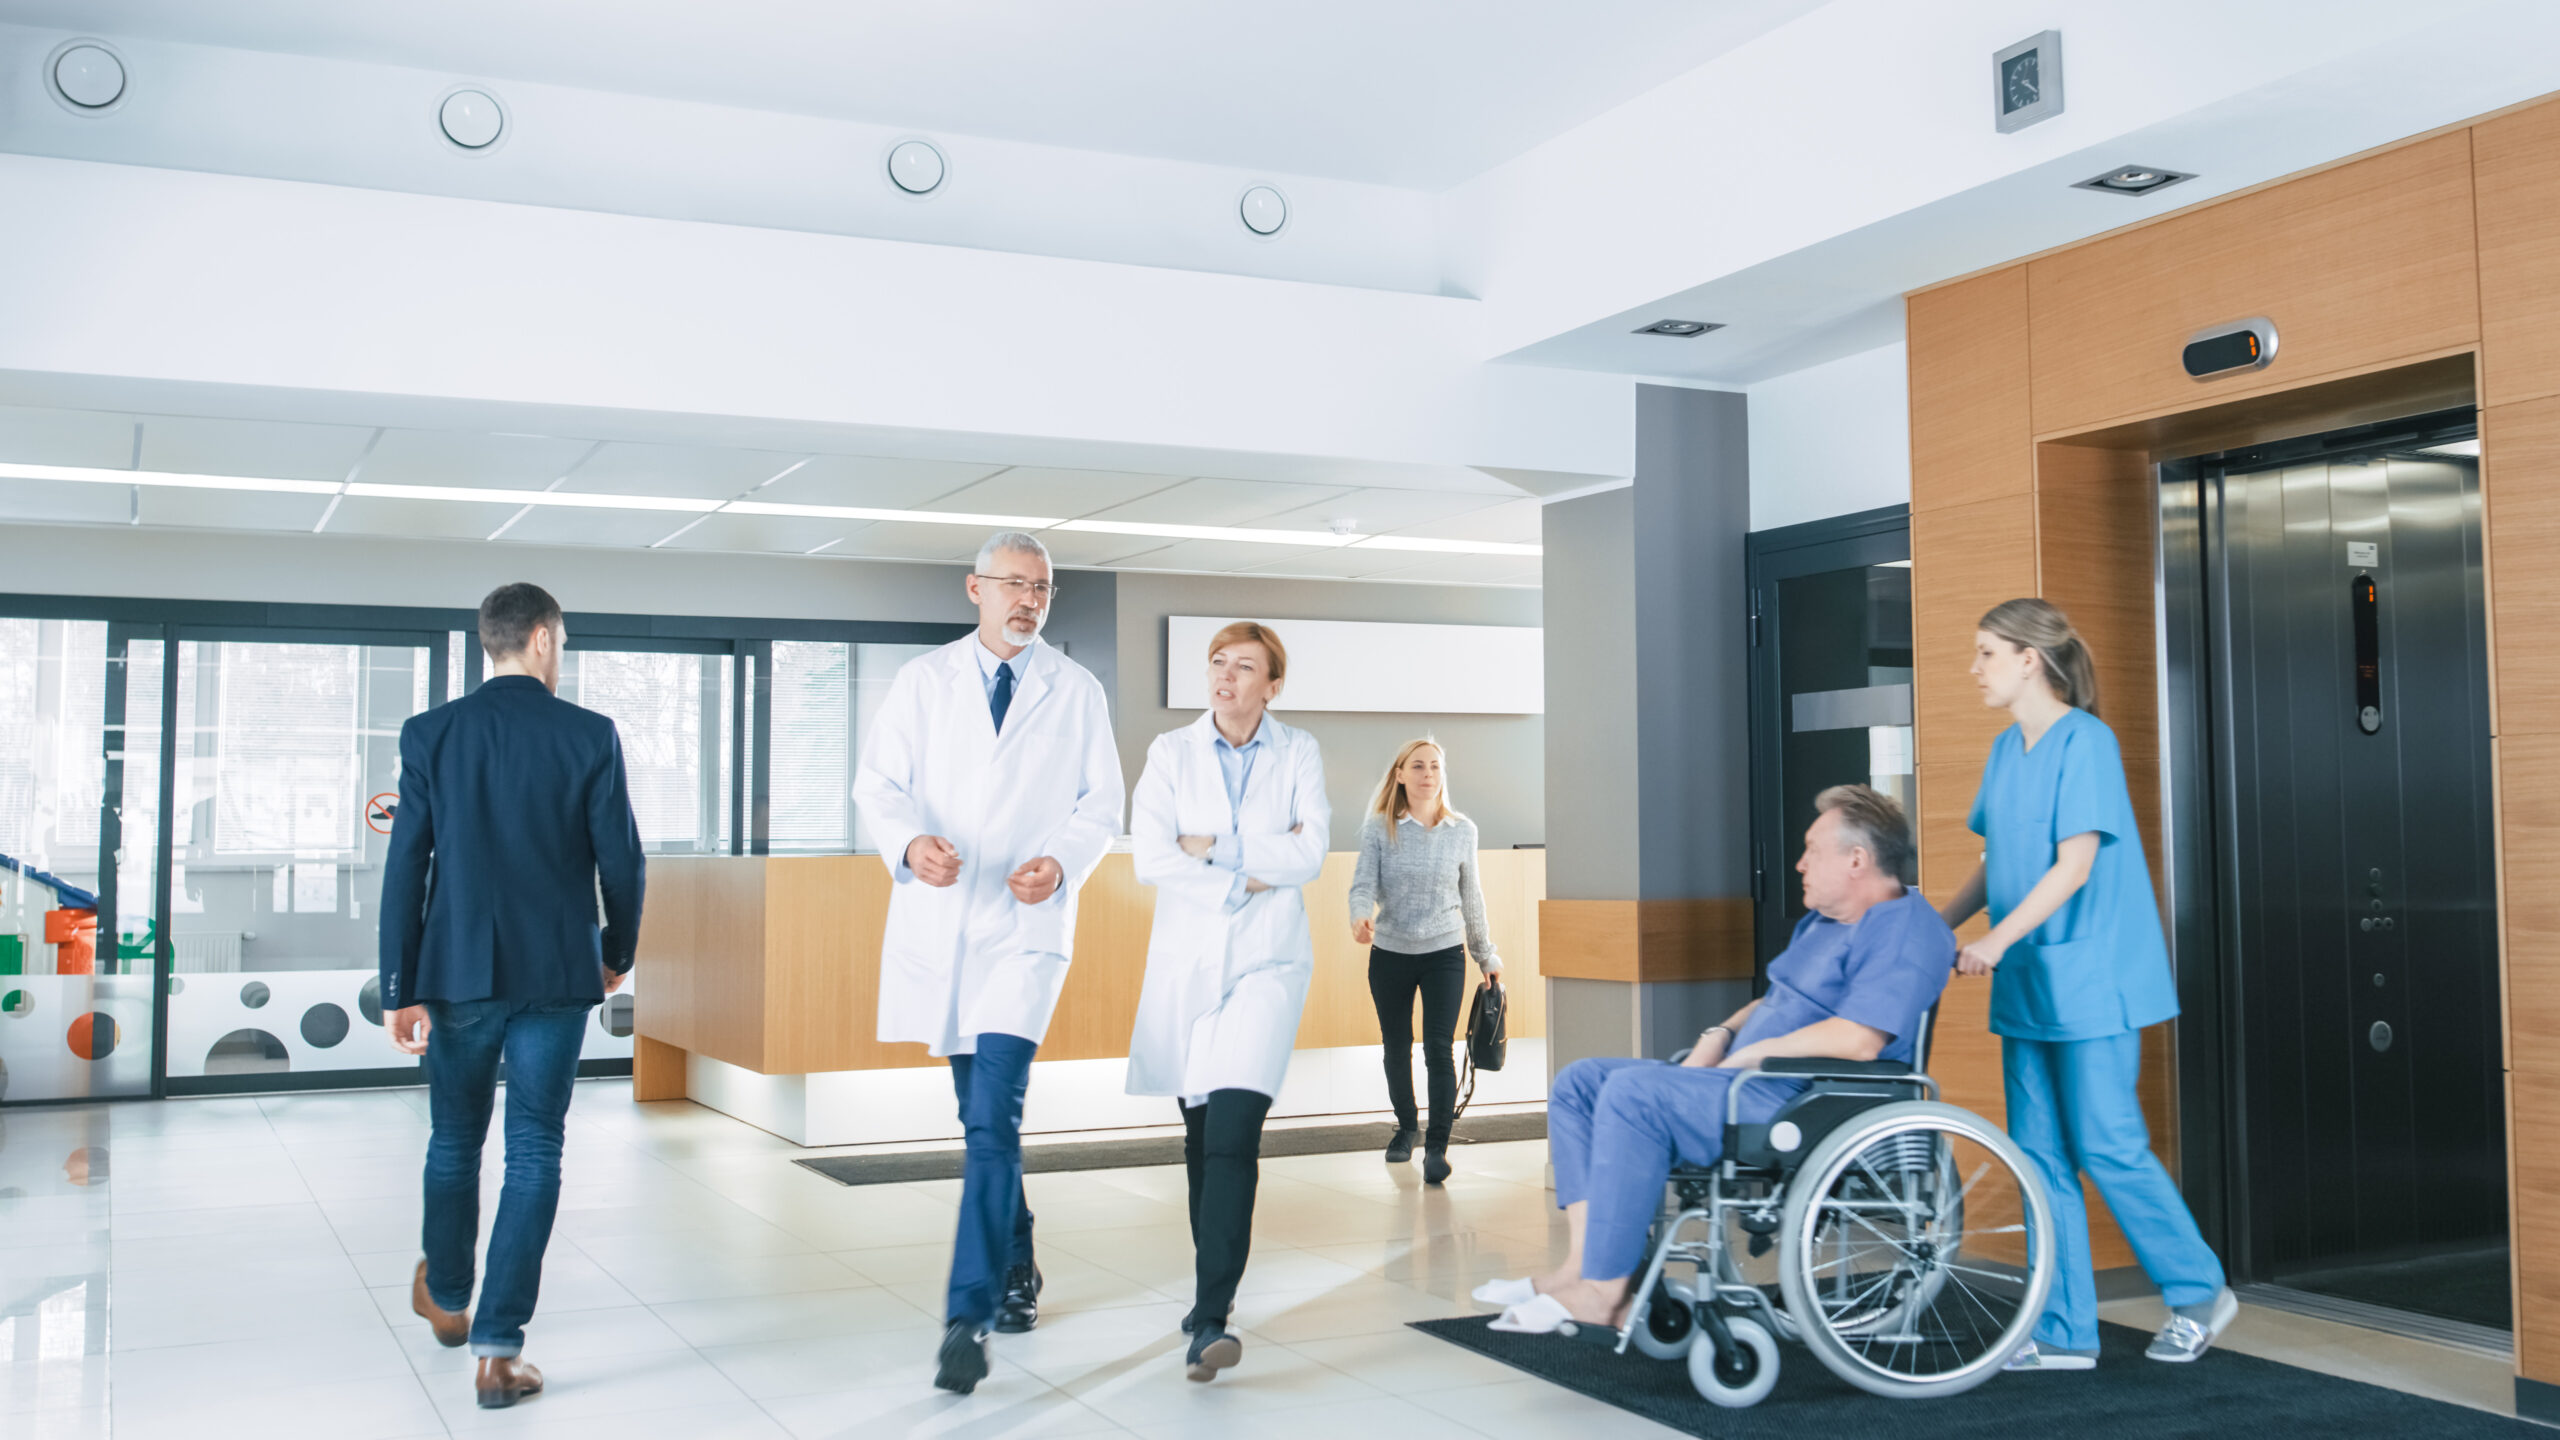 Increase safety and security at hospitals with AI -driven video analytics